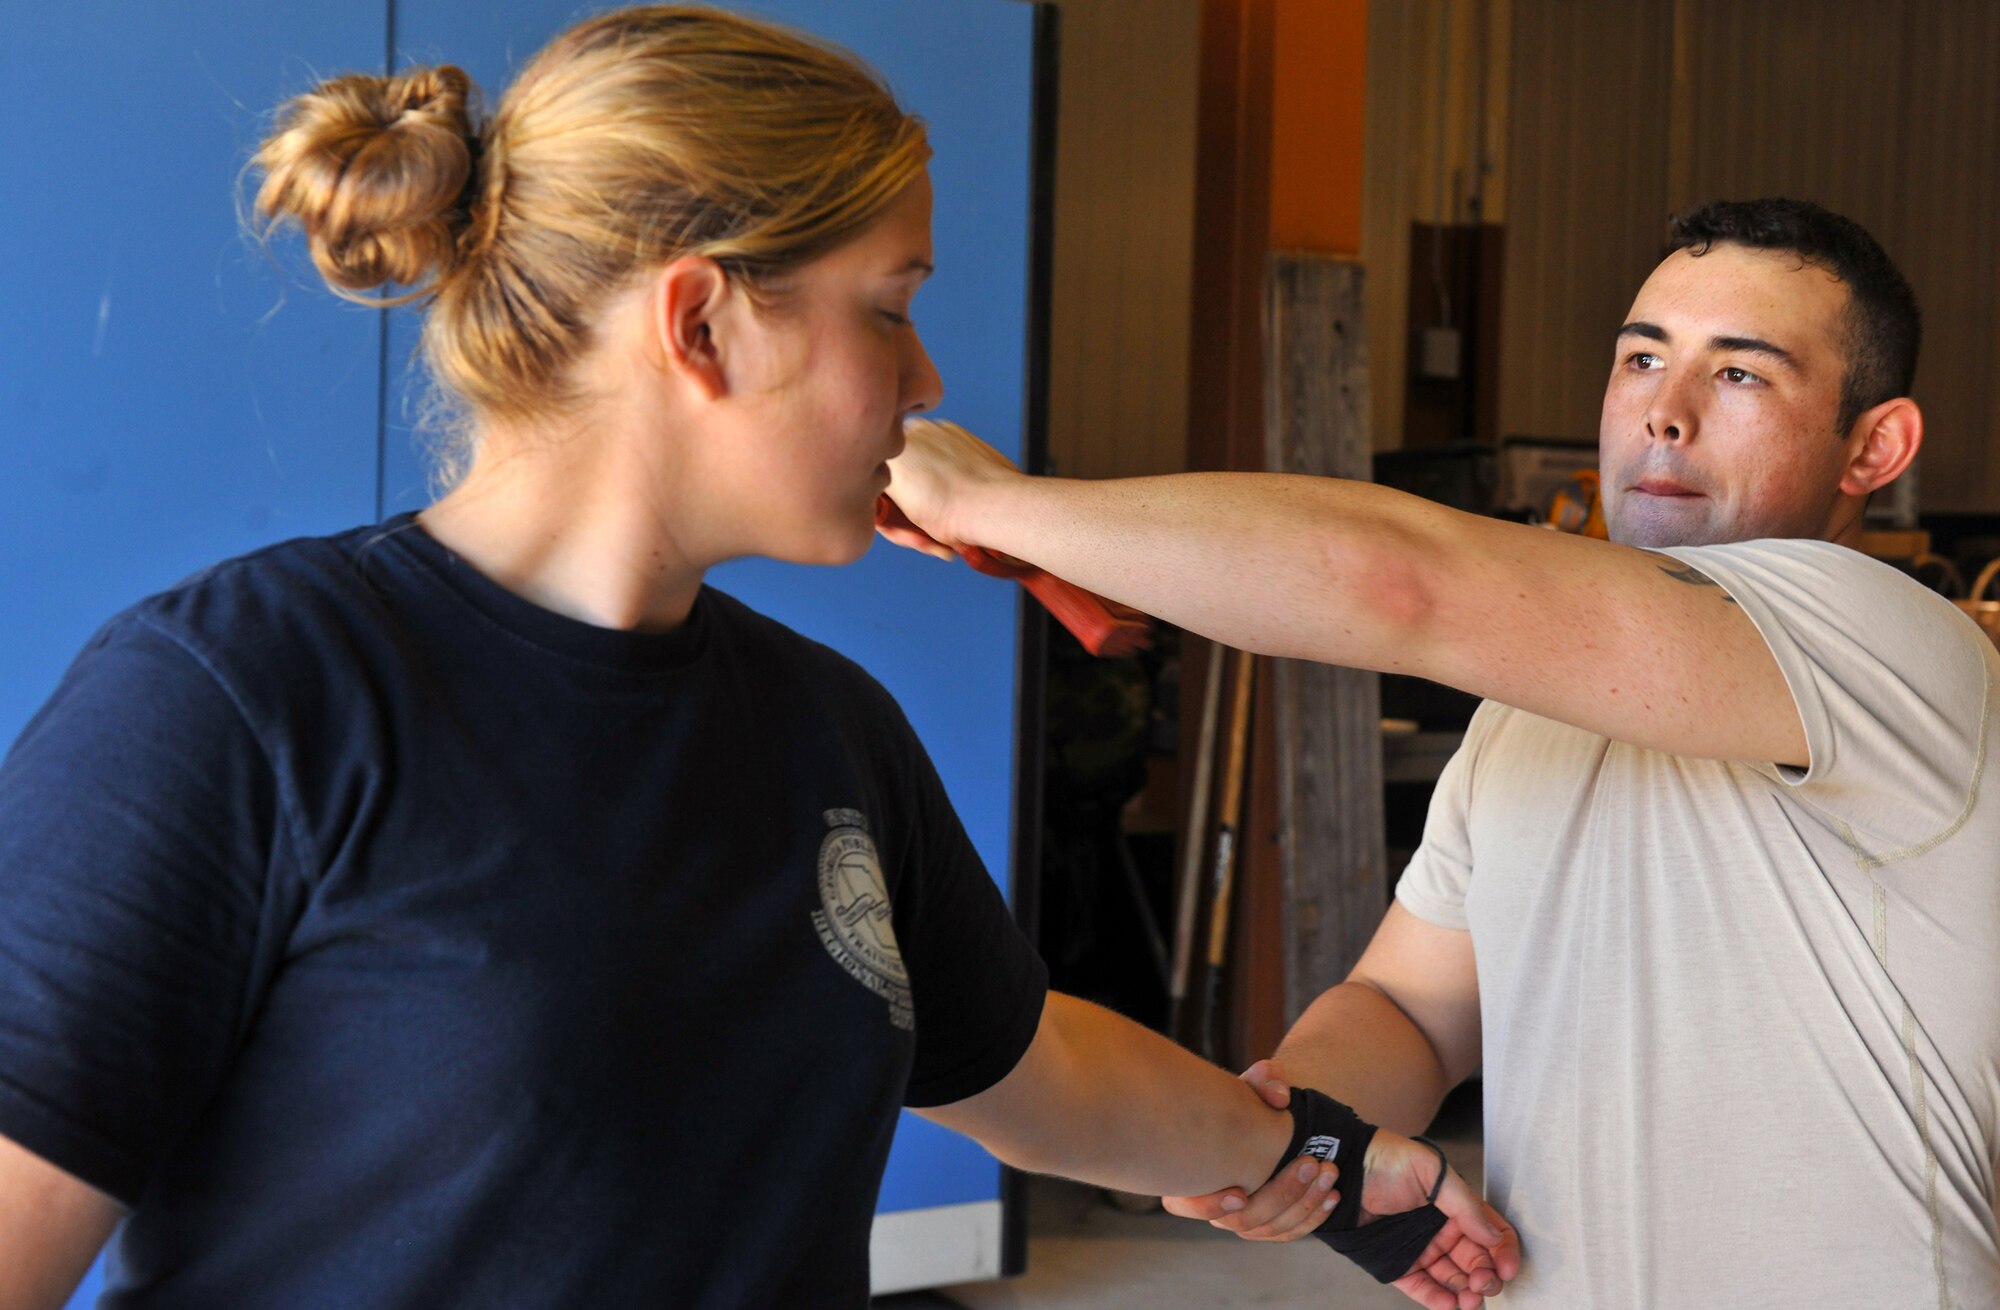 Senior Airman Krystoffer Miller demonstrates to Felicia Pelleteri what attack to perform after disarming an enemy Oct. 14, 2010, at Moody Air Force Base, Ga. Security Forces Airmen taught Krav Maga to Lowndes County Sheriff's Department deputies and Special Weapons and Tactics members. Airman Miller is a 822nd Base Defense Squadron fire team leader. Ms. Pelleteri is a Lowndes County Sheriff's Department deputy. (U.S. Air Force photo/Airman 1st Class Joshua Green)